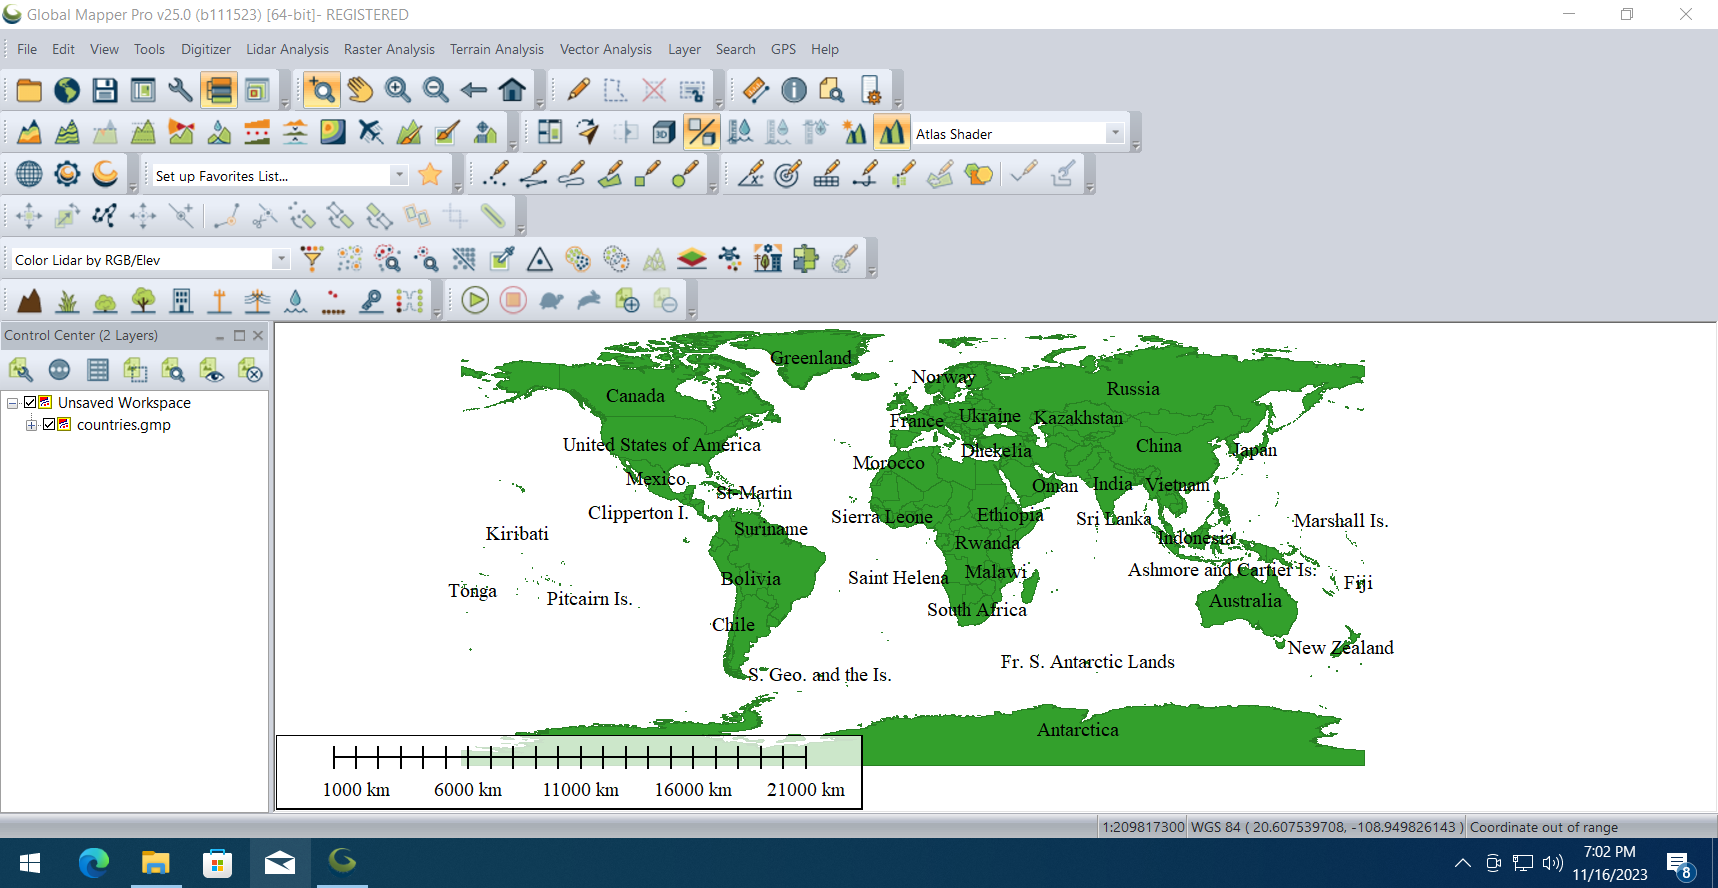 Working with Global Mapper Pro 25.0.2.111523 full license